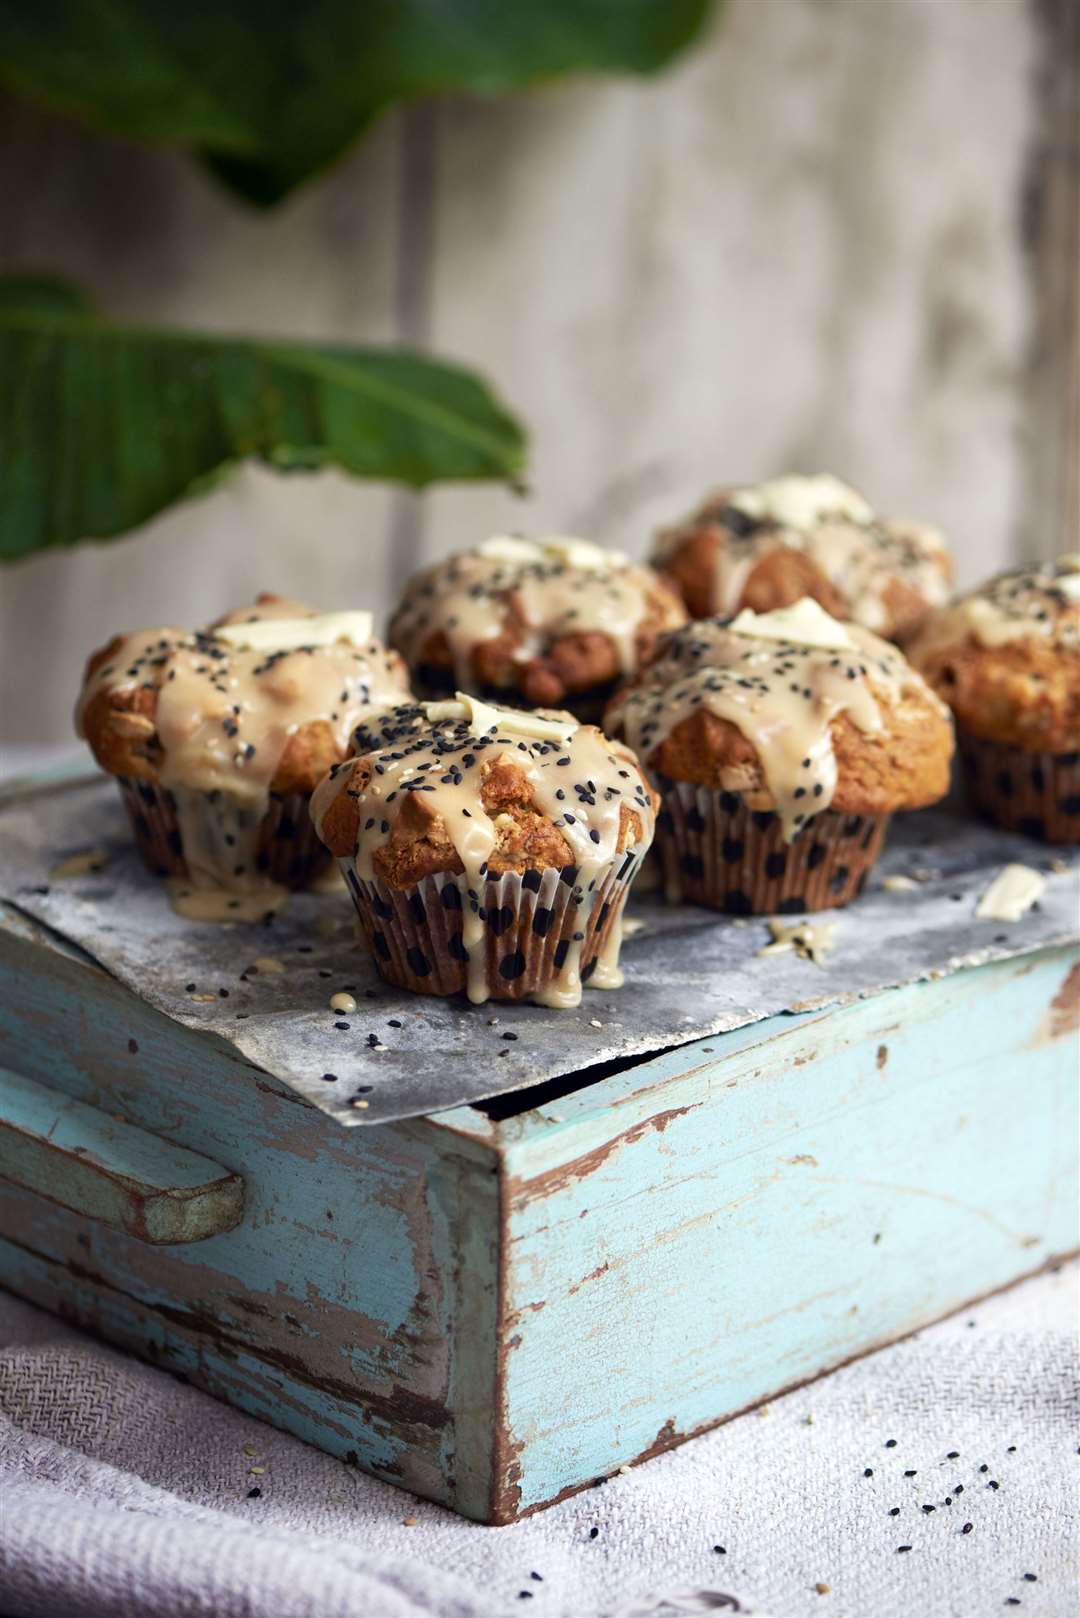 Elly McCausland's banana, tahini and white chocolate muffins. Picture: Polly Webster/PA